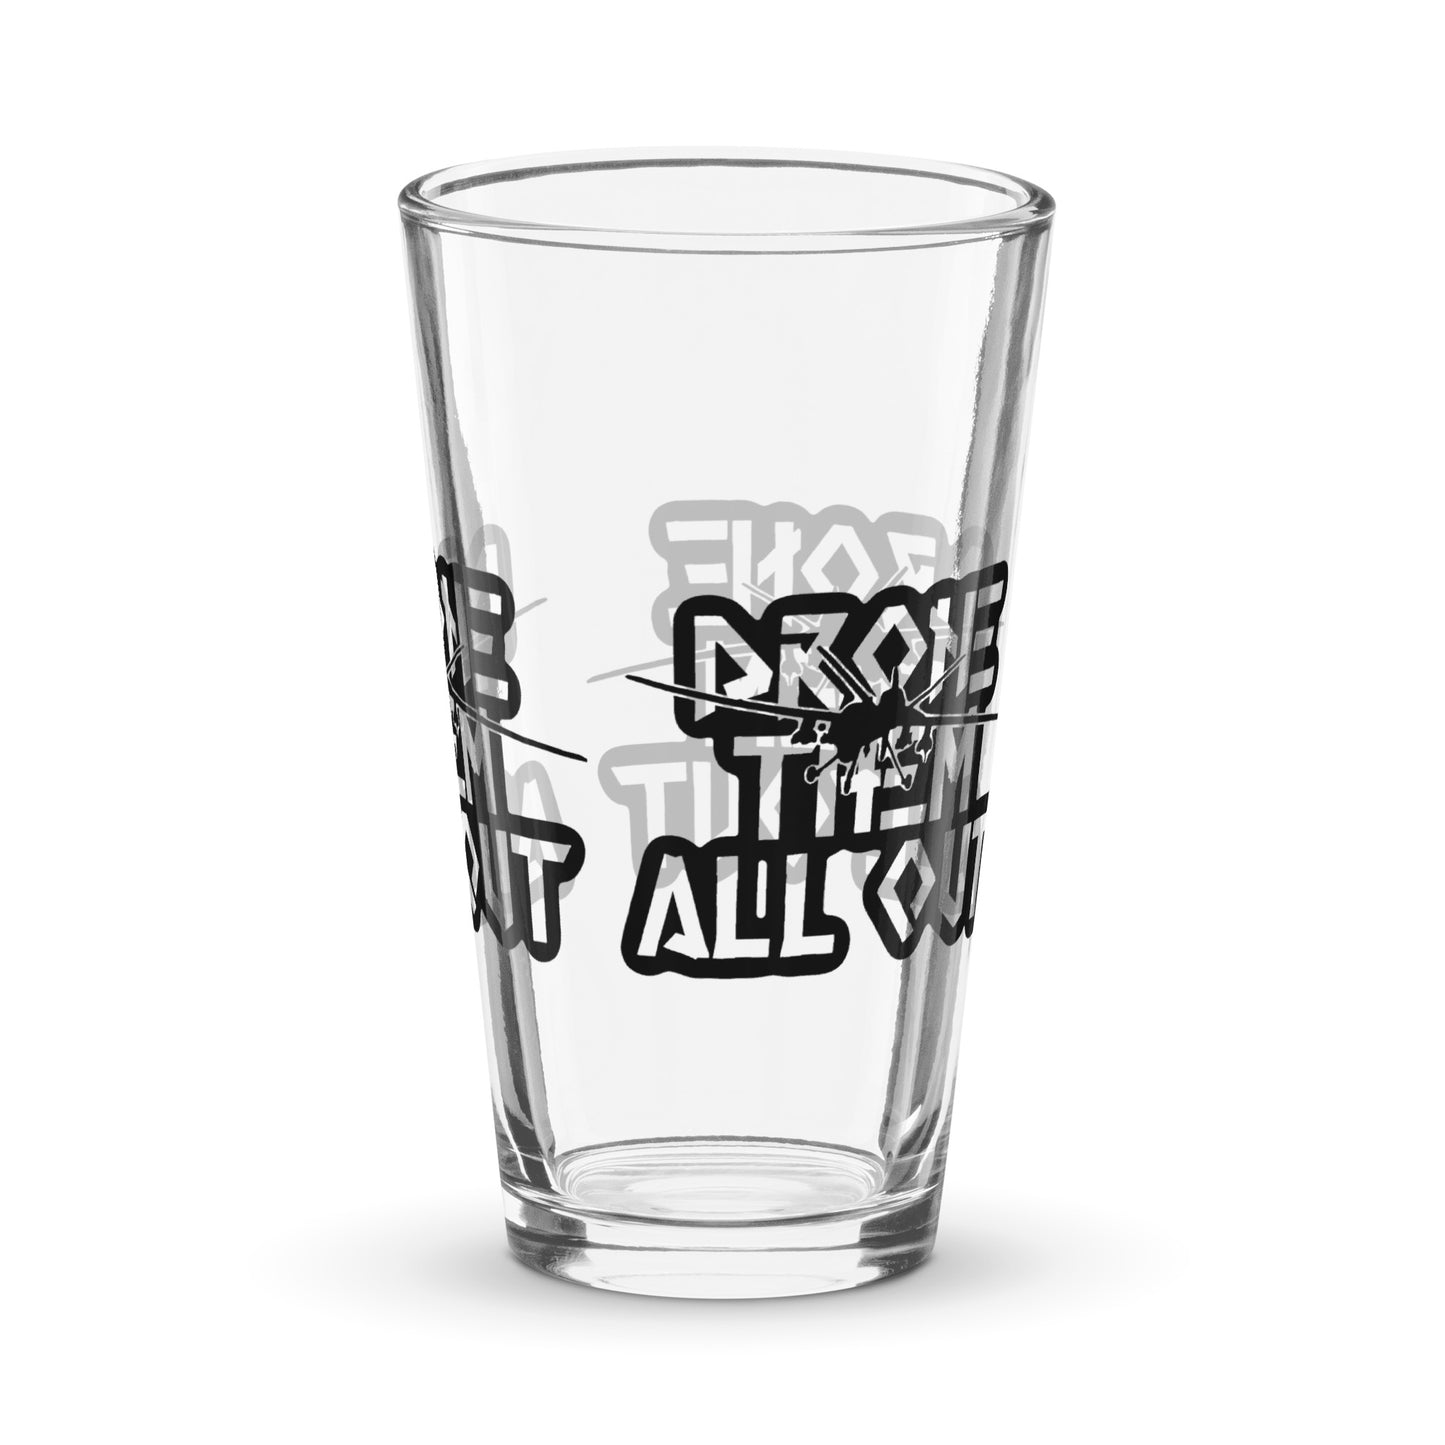 Drone Them Out- Reaper Shaker pint glass